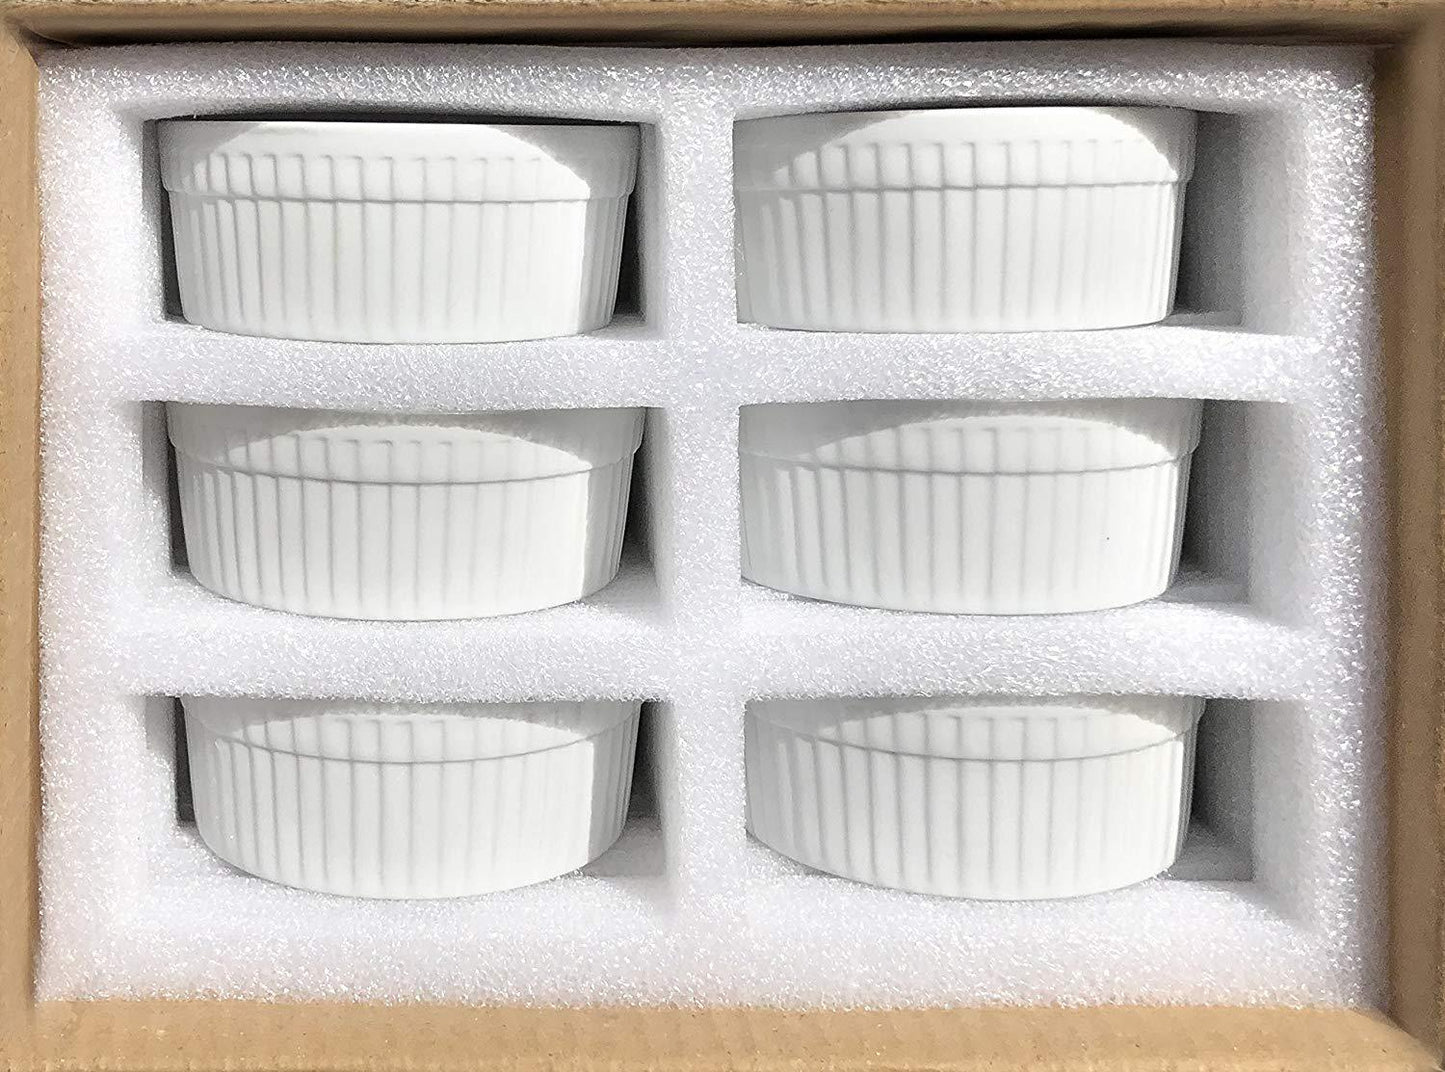 Furmaware Set of 6 Ceramic Ramekins - Non-Toxic Classic White Porcelain Custard Cups - Oven Safe Ramekins, for Baking and Serving Single Servings of Desserts, Dips, and Snacks - (4 oz) - CookCave